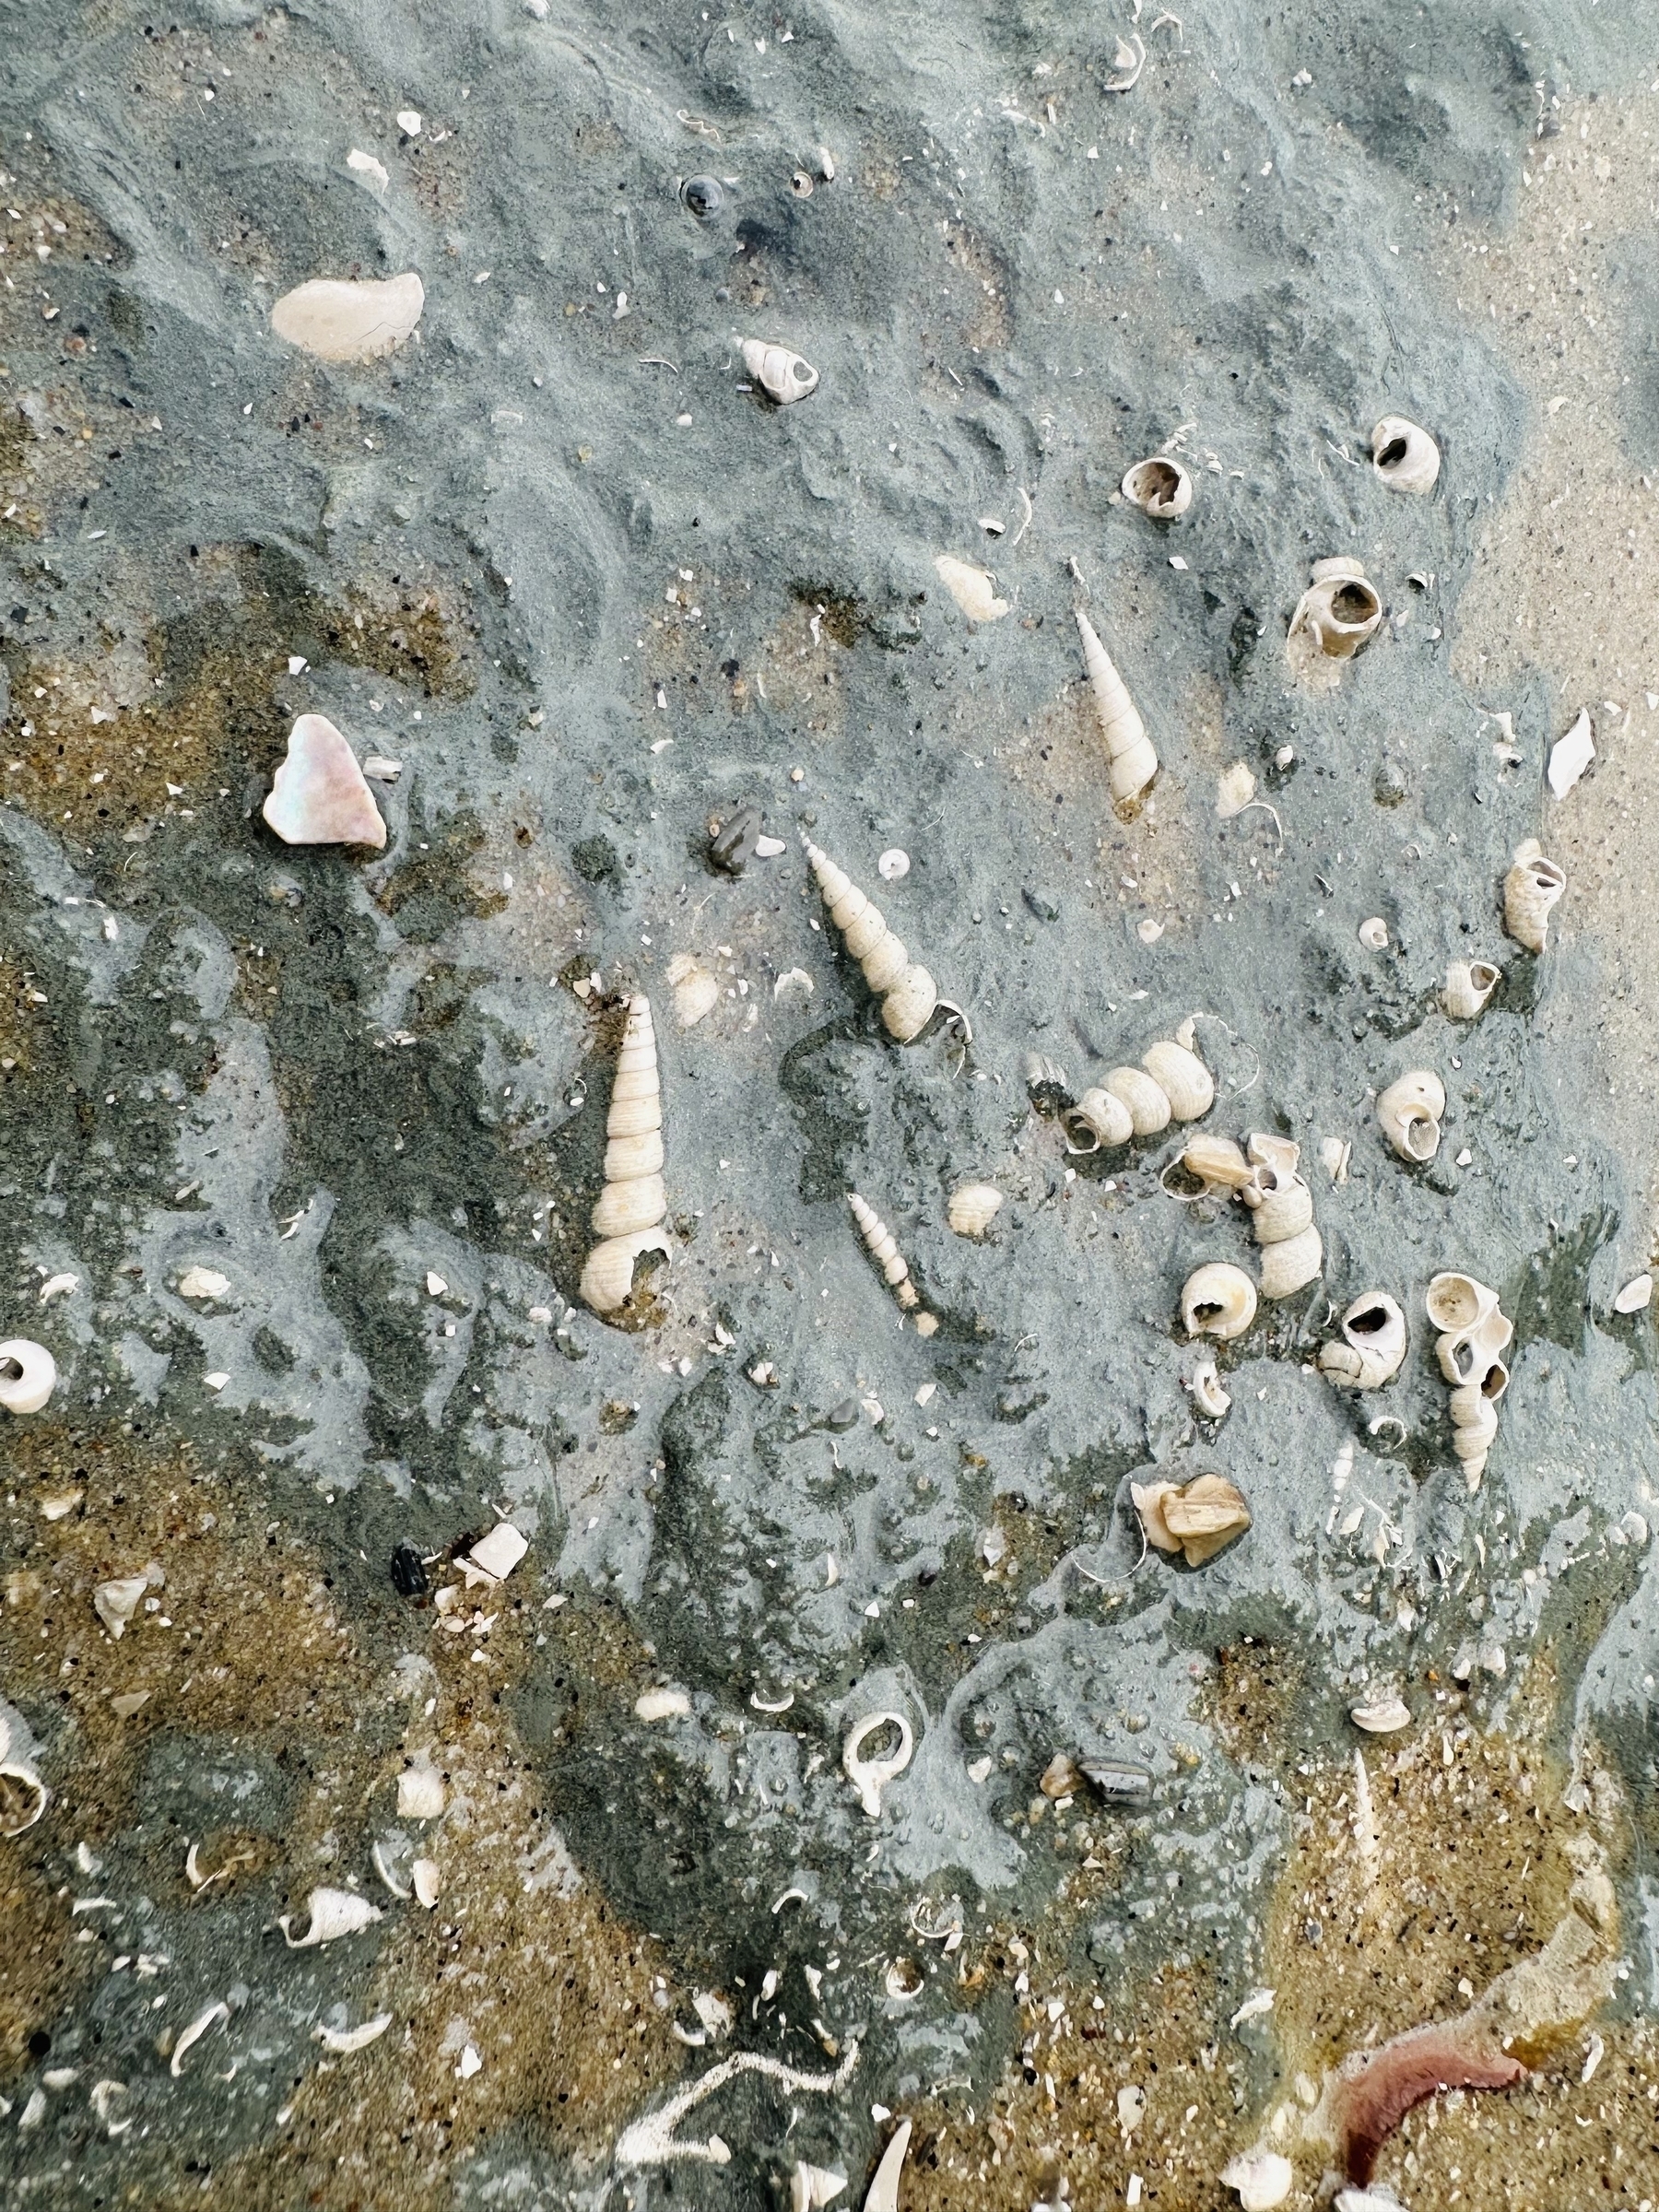 Fossilized shells embedded in packed beach sand.